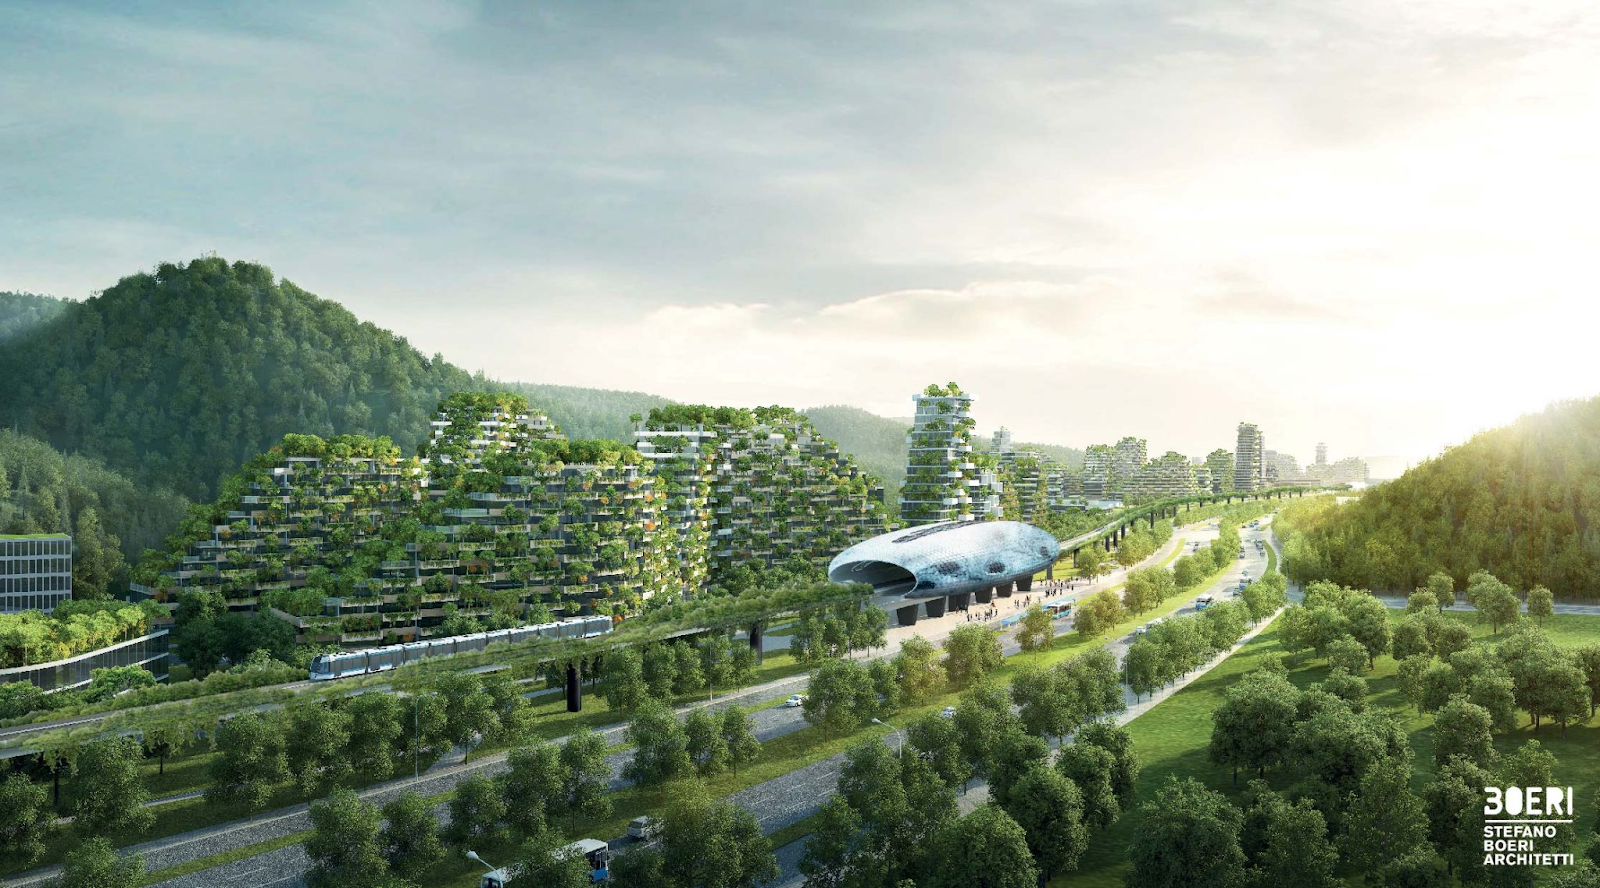 Solarpunk: Refuturing our Imagination for an Ecological